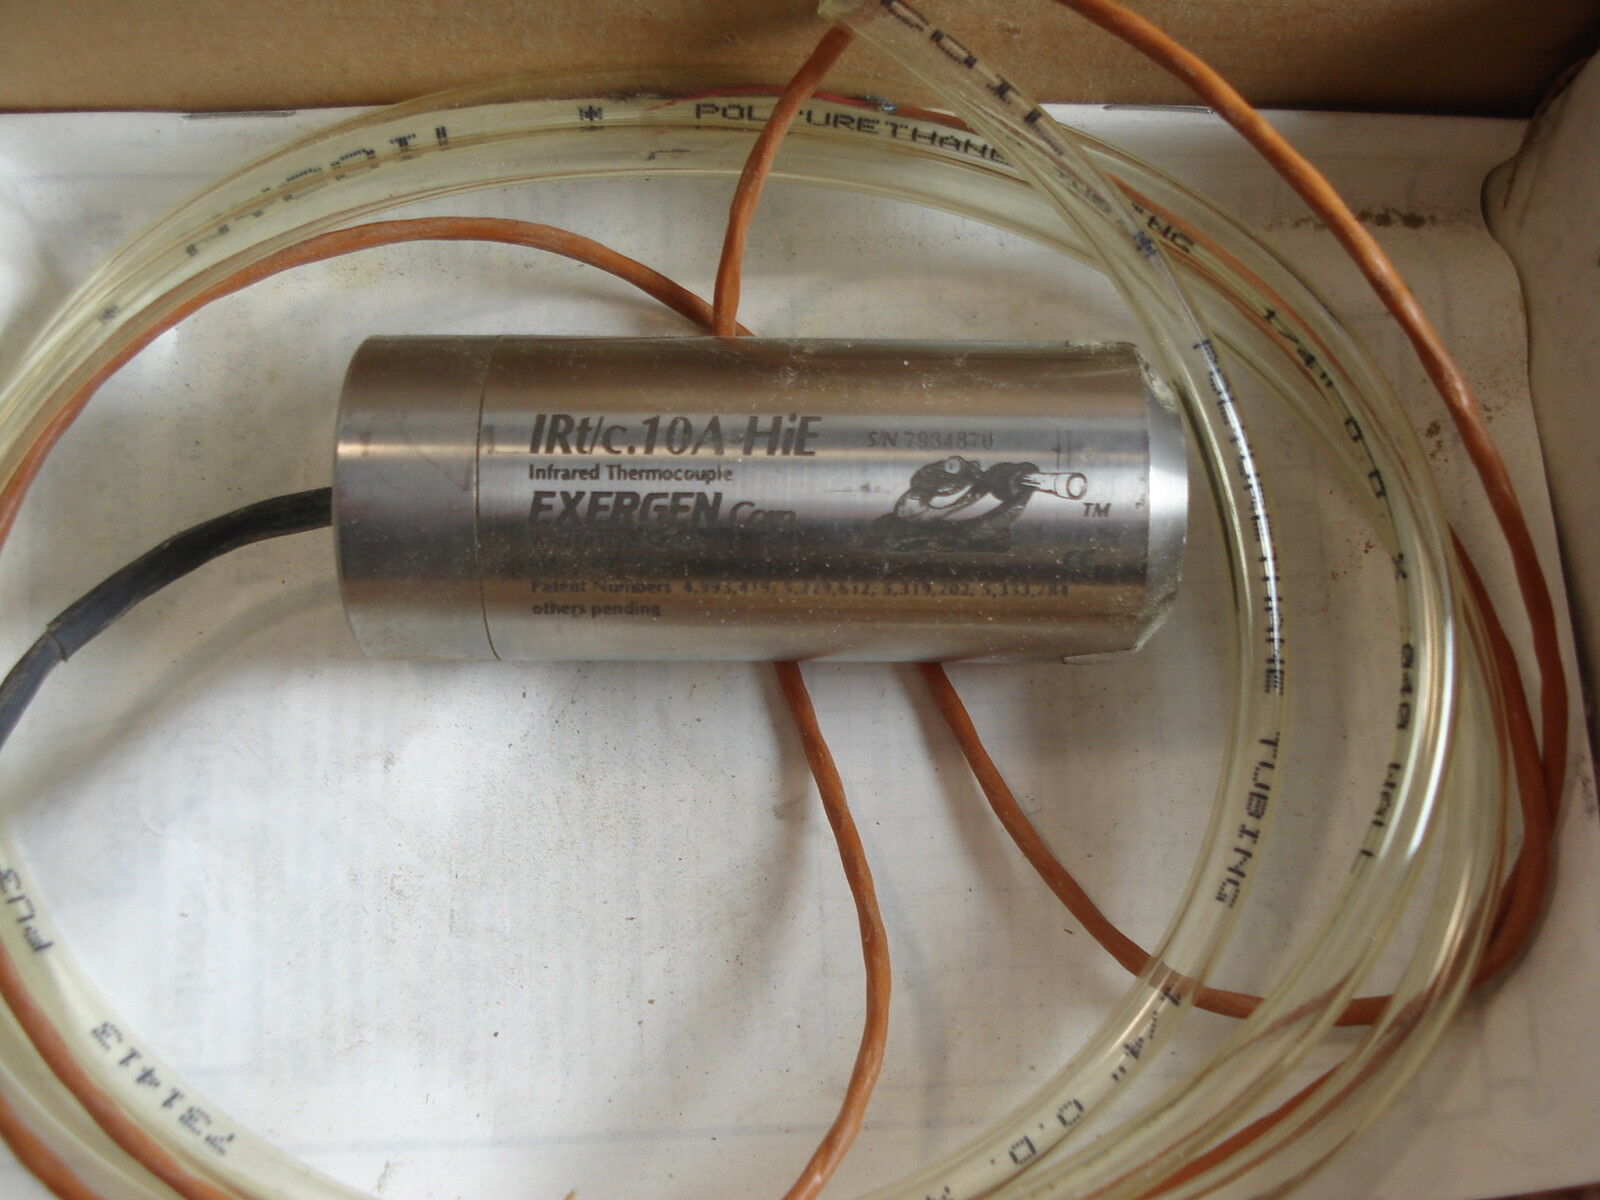 NEW EXERGEN IRt/c.10A-HiE INFRARED THERMOCOUPLE